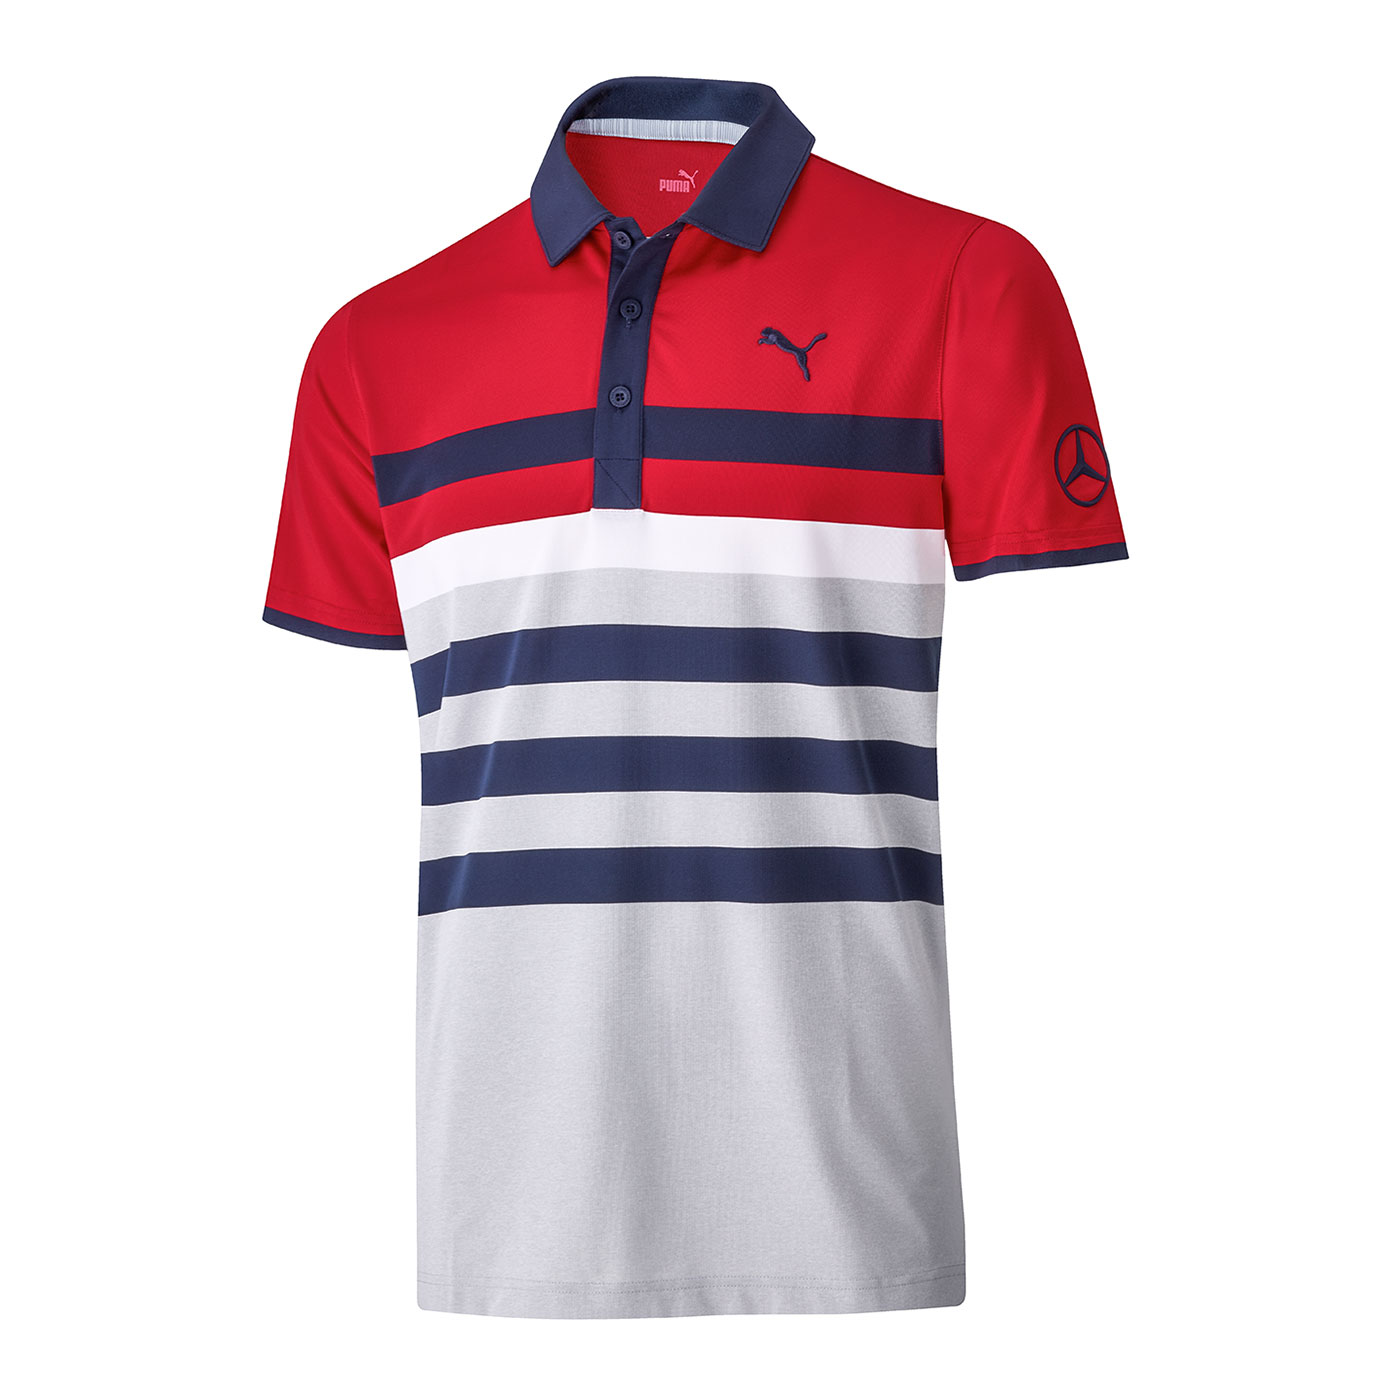 Stripped Puma Polo | Mercedes-Benz Lifestyle Collection